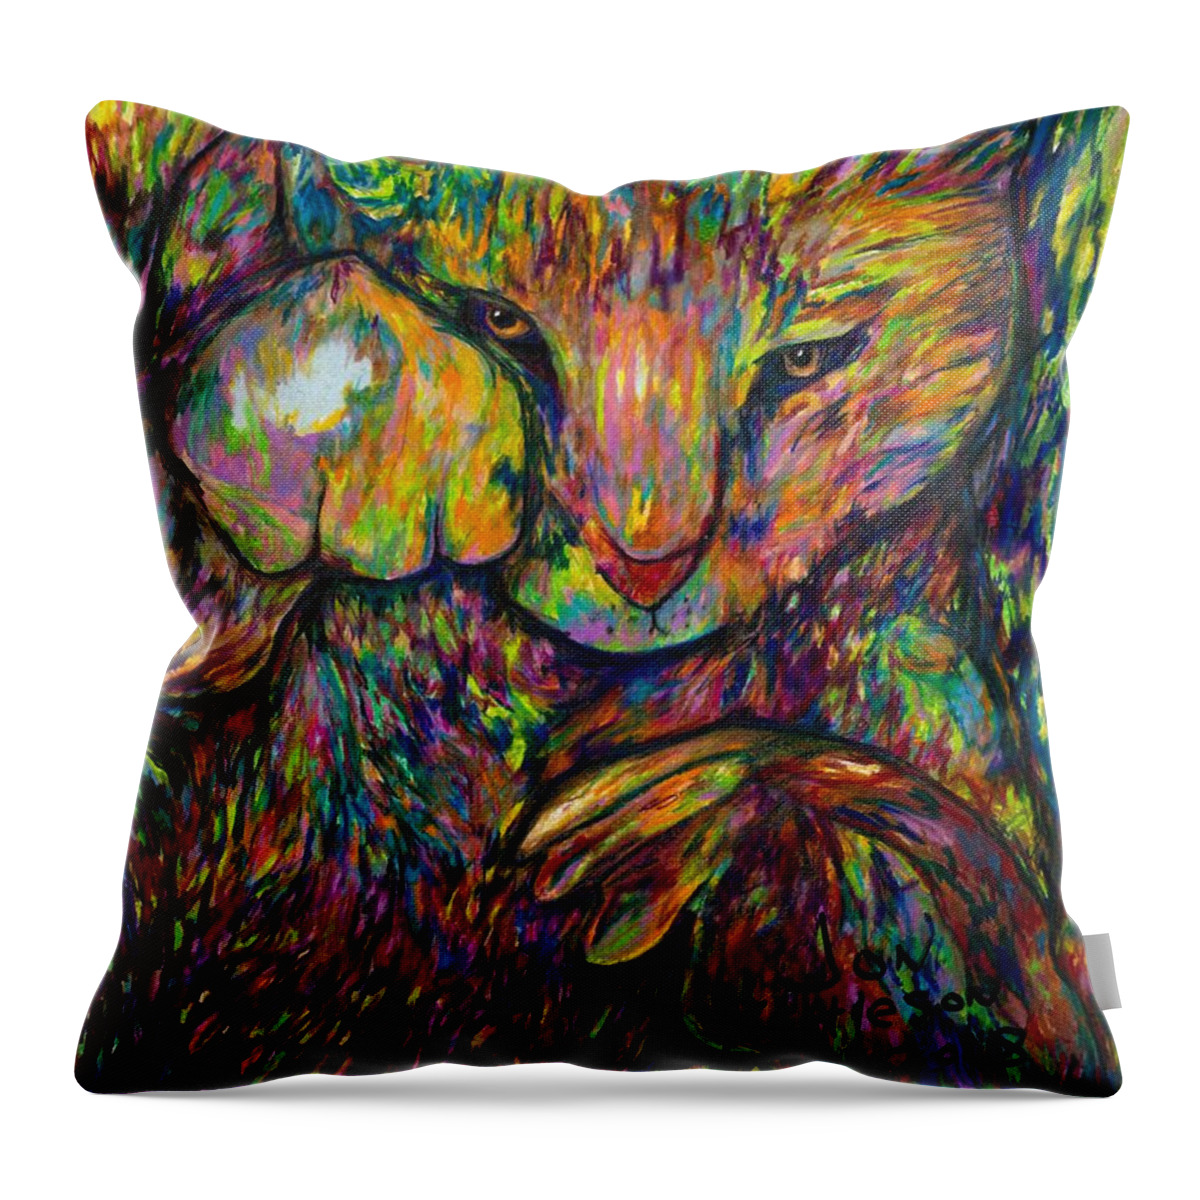 #cat #cats #catsofinstagram #of #catstagram #catlover #catlife #instagram #catlovers #kitten #instacat #kitty #pet #cute #love #meow #dog #catoftheday #pets #kittens #gato #animals #catlove #animal #cutecat #world #gatos #petsofinstagram #kittensofinstagram #chat Throw Pillow featuring the drawing Gomez by Jon Kittleson